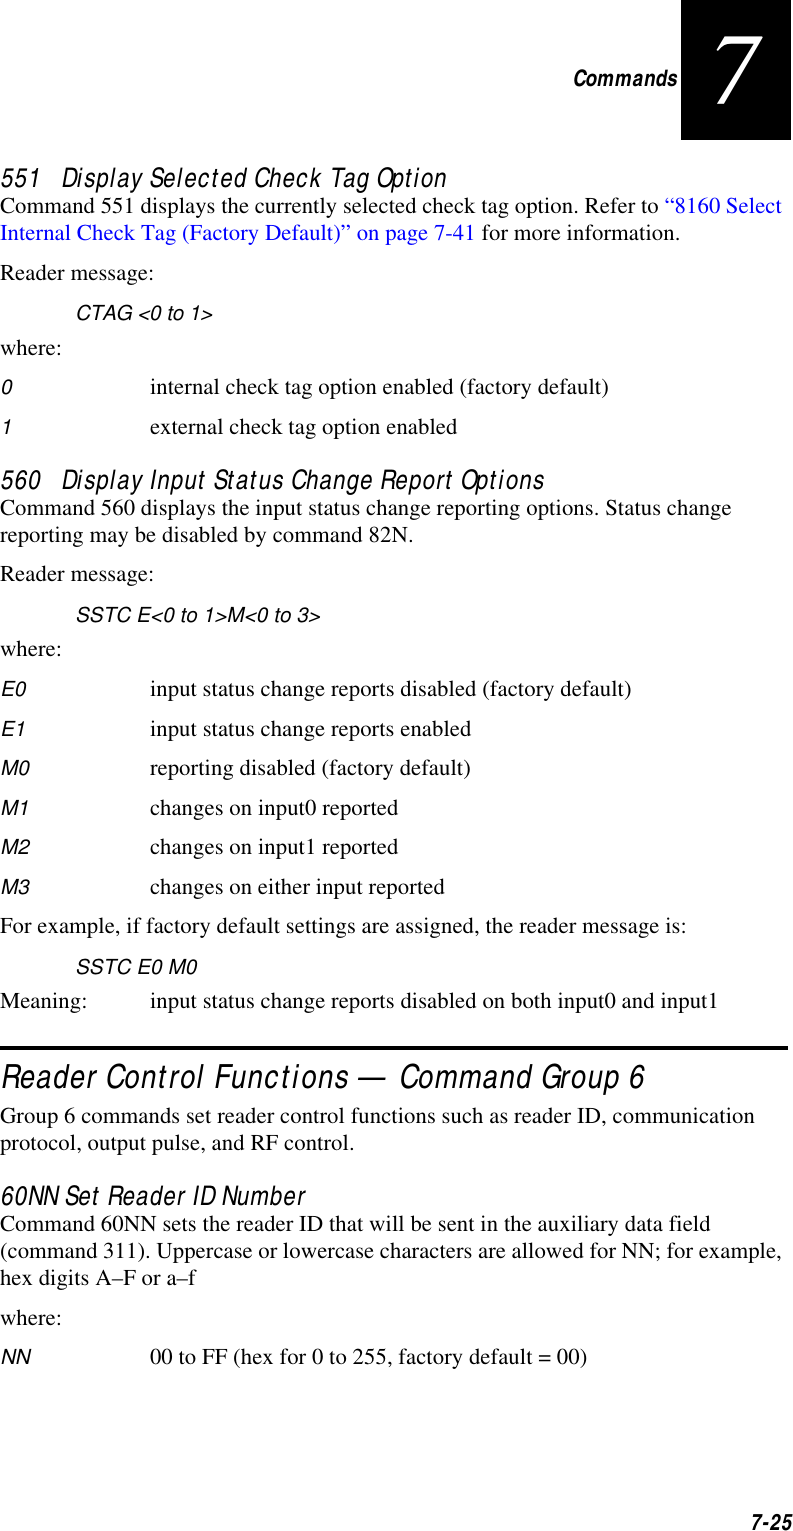 Commands7-257551   Display Selected Check Tag OptionCommand 551 displays the currently selected check tag option. Refer to “8160 Select Internal Check Tag (Factory Default)” on page 7-41 for more information.Reader message:CTAG &lt;0 to 1&gt;where:0internal check tag option enabled (factory default)1external check tag option enabled560   Display Input Status Change Report OptionsCommand 560 displays the input status change reporting options. Status change reporting may be disabled by command 82N.Reader message:SSTC E&lt;0 to 1&gt;M&lt;0 to 3&gt;where:E0 input status change reports disabled (factory default)E1 input status change reports enabledM0 reporting disabled (factory default)M1 changes on input0 reportedM2 changes on input1 reportedM3 changes on either input reportedFor example, if factory default settings are assigned, the reader message is:SSTC E0 M0Meaning: input status change reports disabled on both input0 and input1Reader Control Functions — Command Group 6Group 6 commands set reader control functions such as reader ID, communication protocol, output pulse, and RF control.60NN Set Reader ID NumberCommand 60NN sets the reader ID that will be sent in the auxiliary data field (command 311). Uppercase or lowercase characters are allowed for NN; for example, hex digits A–F or a–fwhere: NN 00 to FF (hex for 0 to 255, factory default = 00)